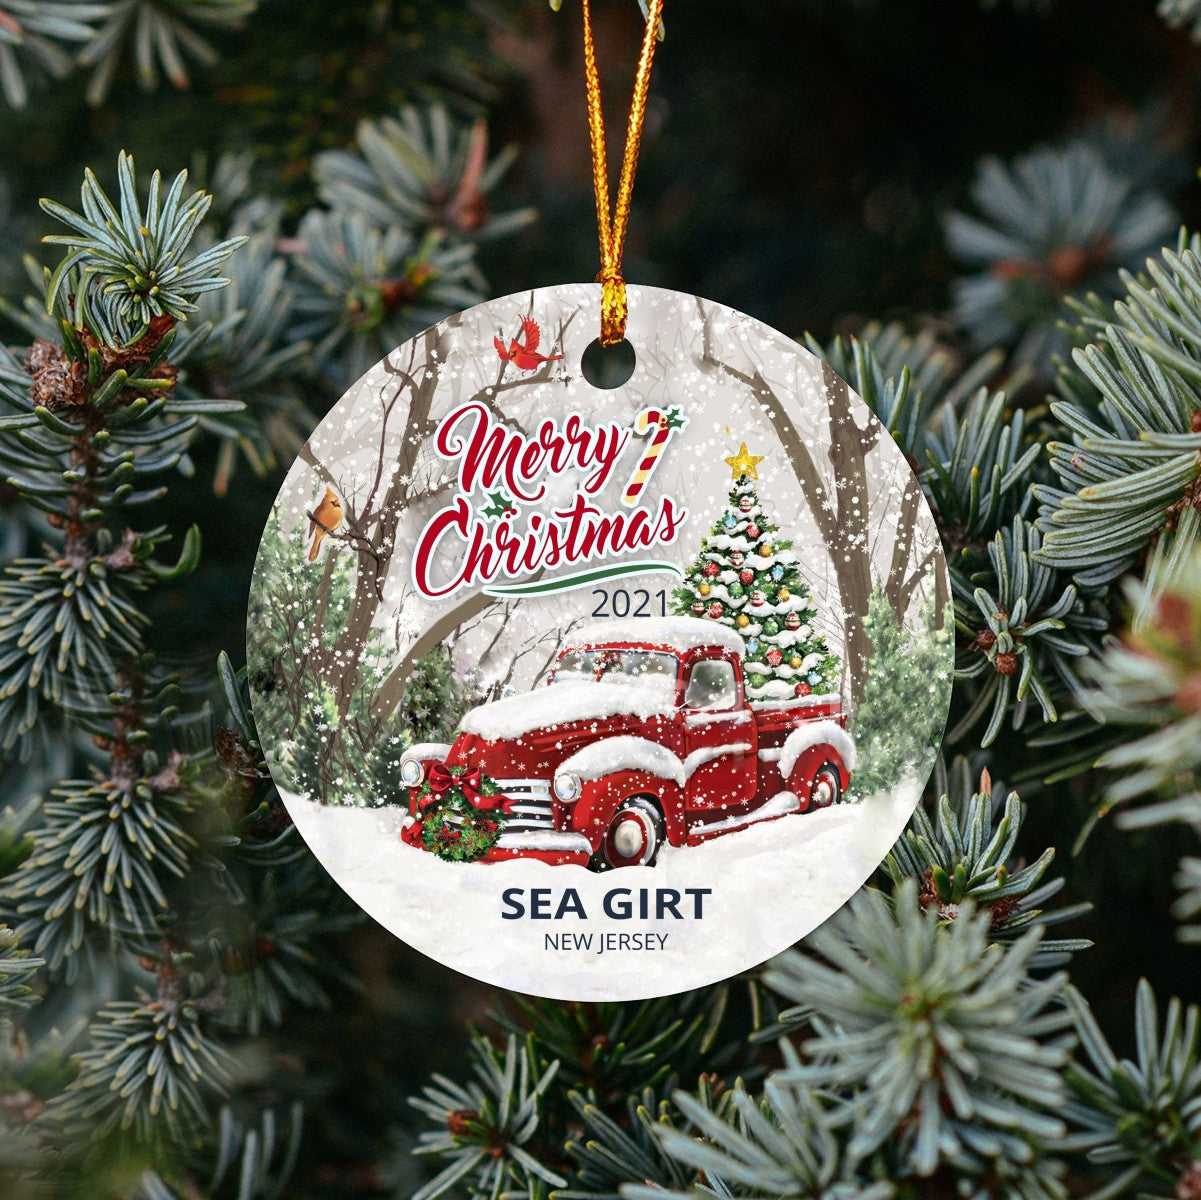 Christmas Tree Ornaments Sea Girt - Ornament With Name City, State Sea Girt New Jersey NJ Ornament - Red Truck Xmas Ornaments 3'' Plastic Gift For Family, Friend And Housewarming